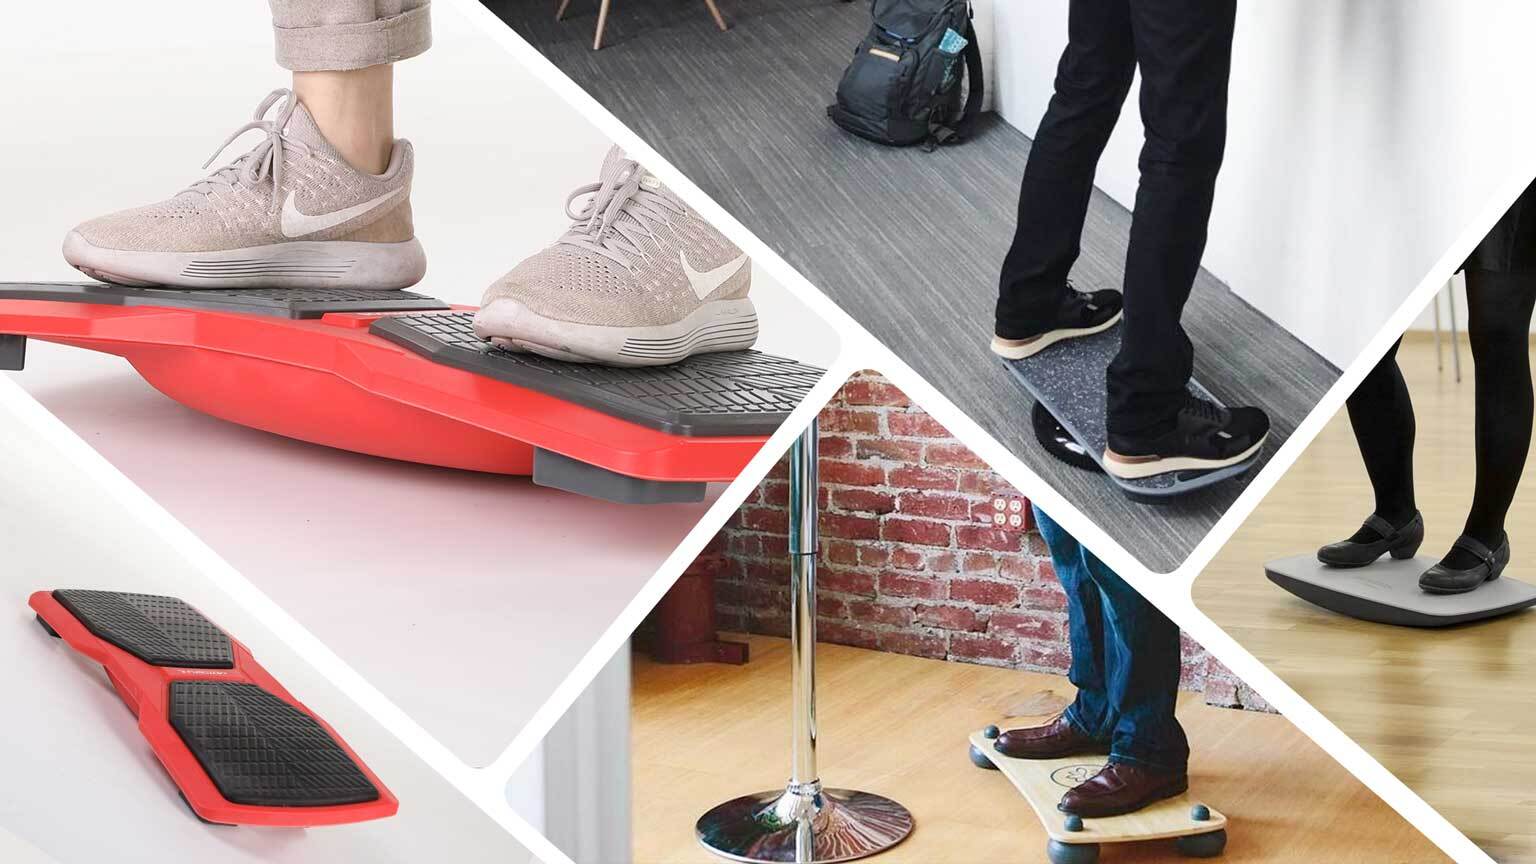 The 6 Best Standing Desk Balance Boards for Your Office in 2022